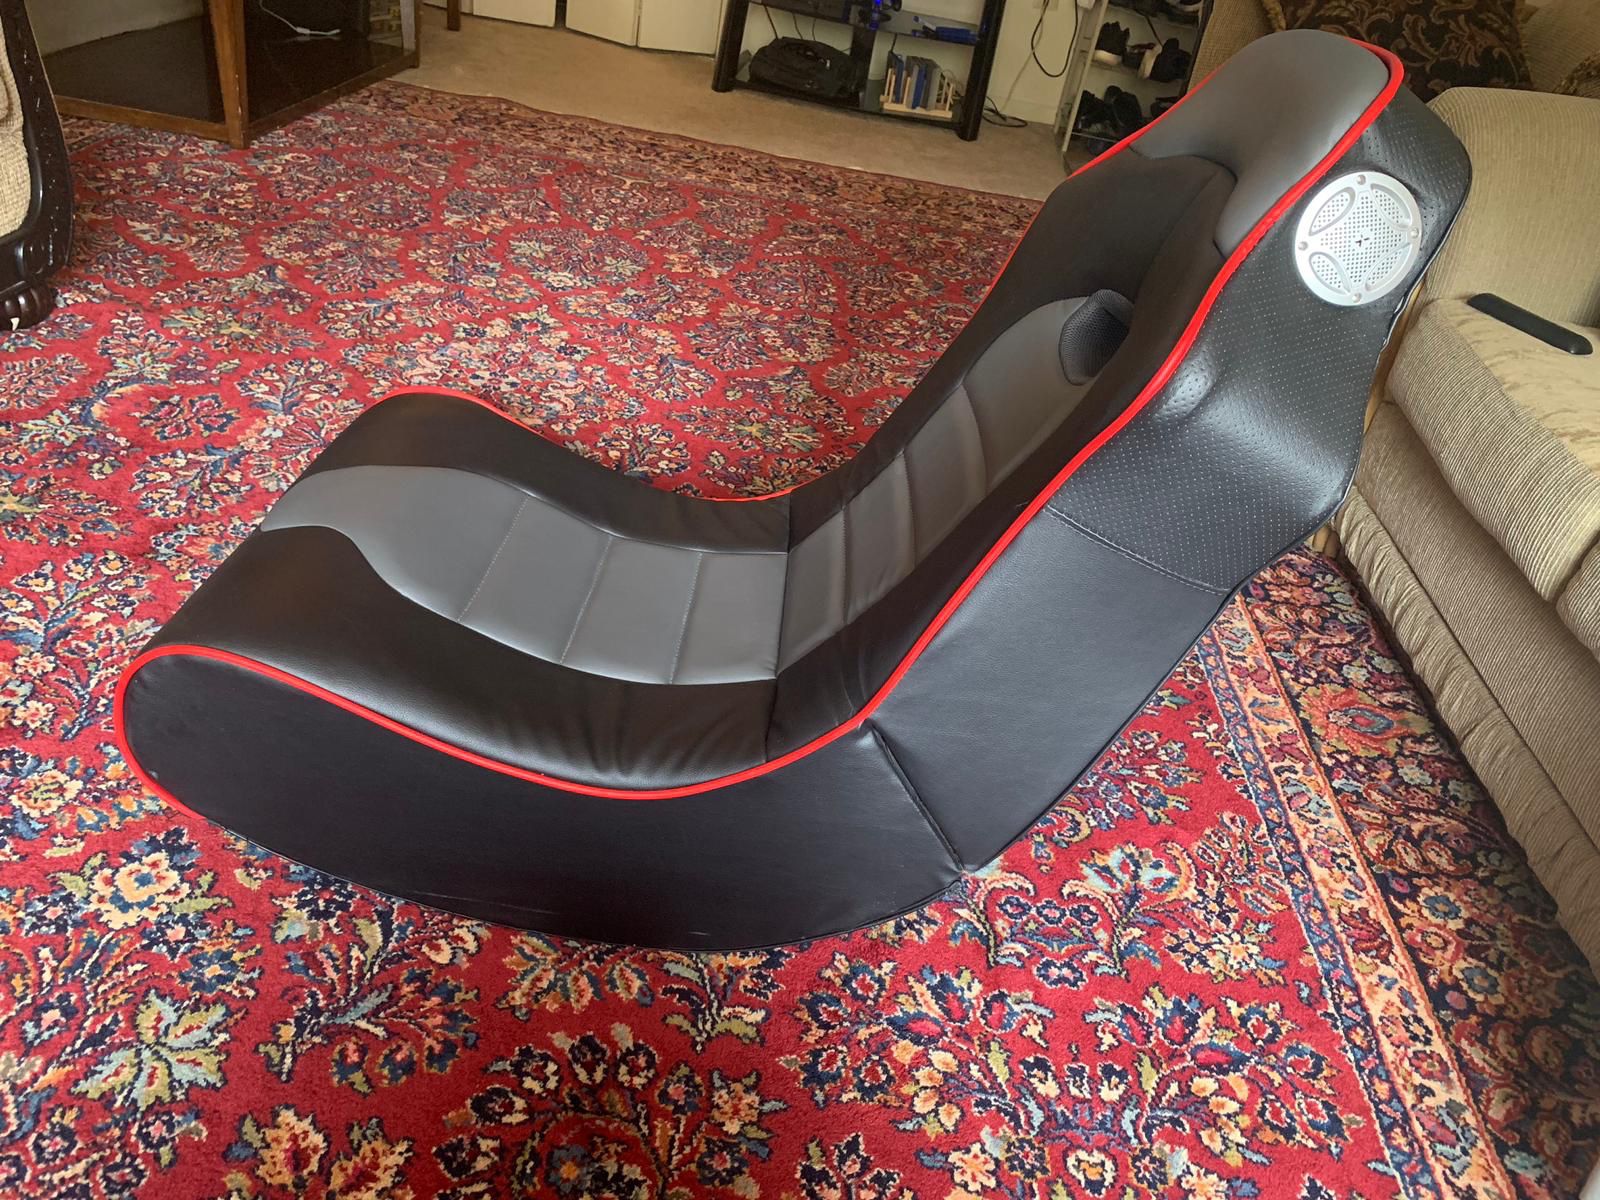 Gaming chair new condition